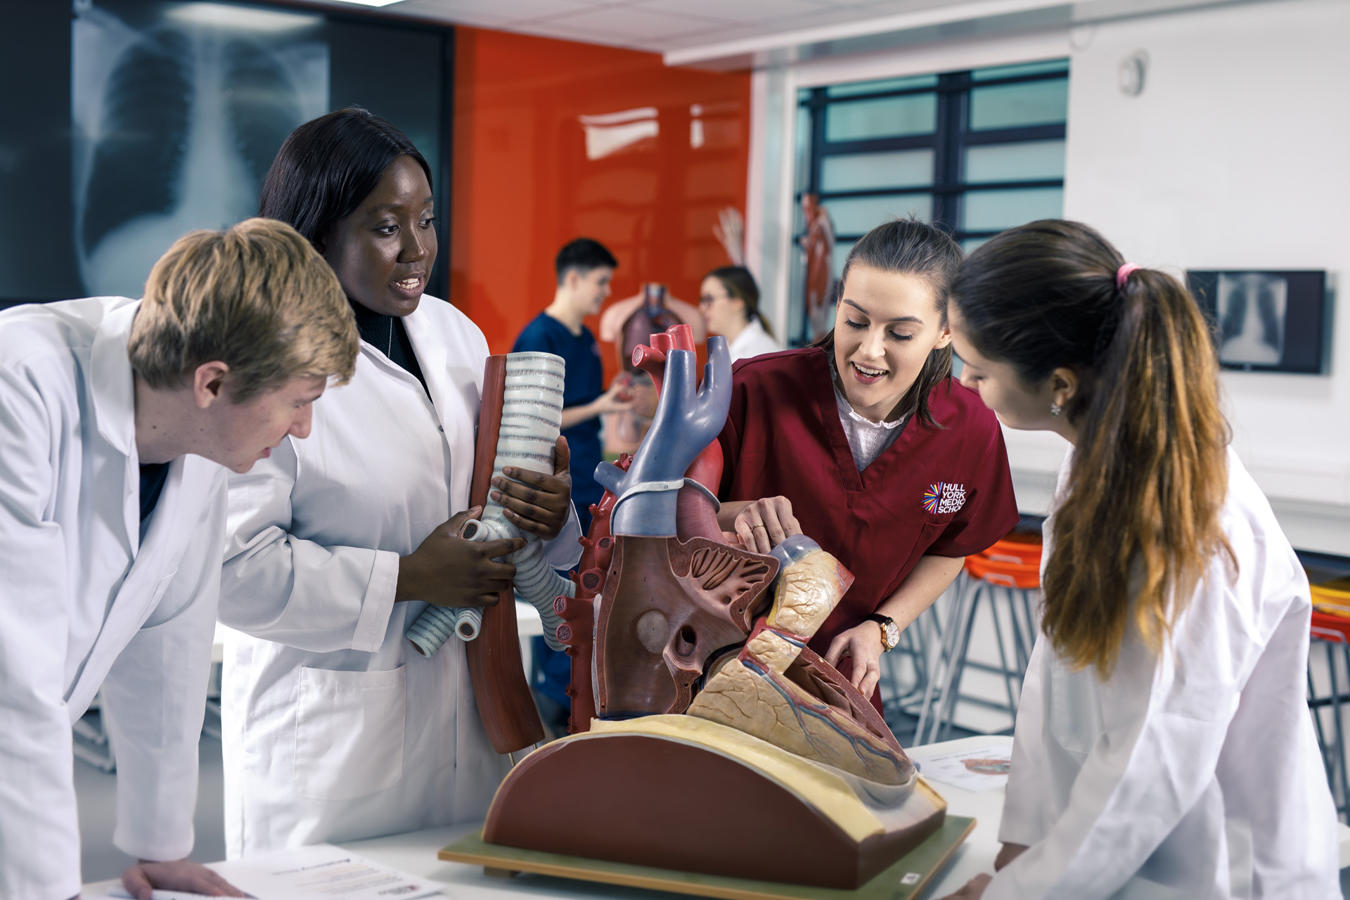 Anatomy students inspecting oversized model of a human heart